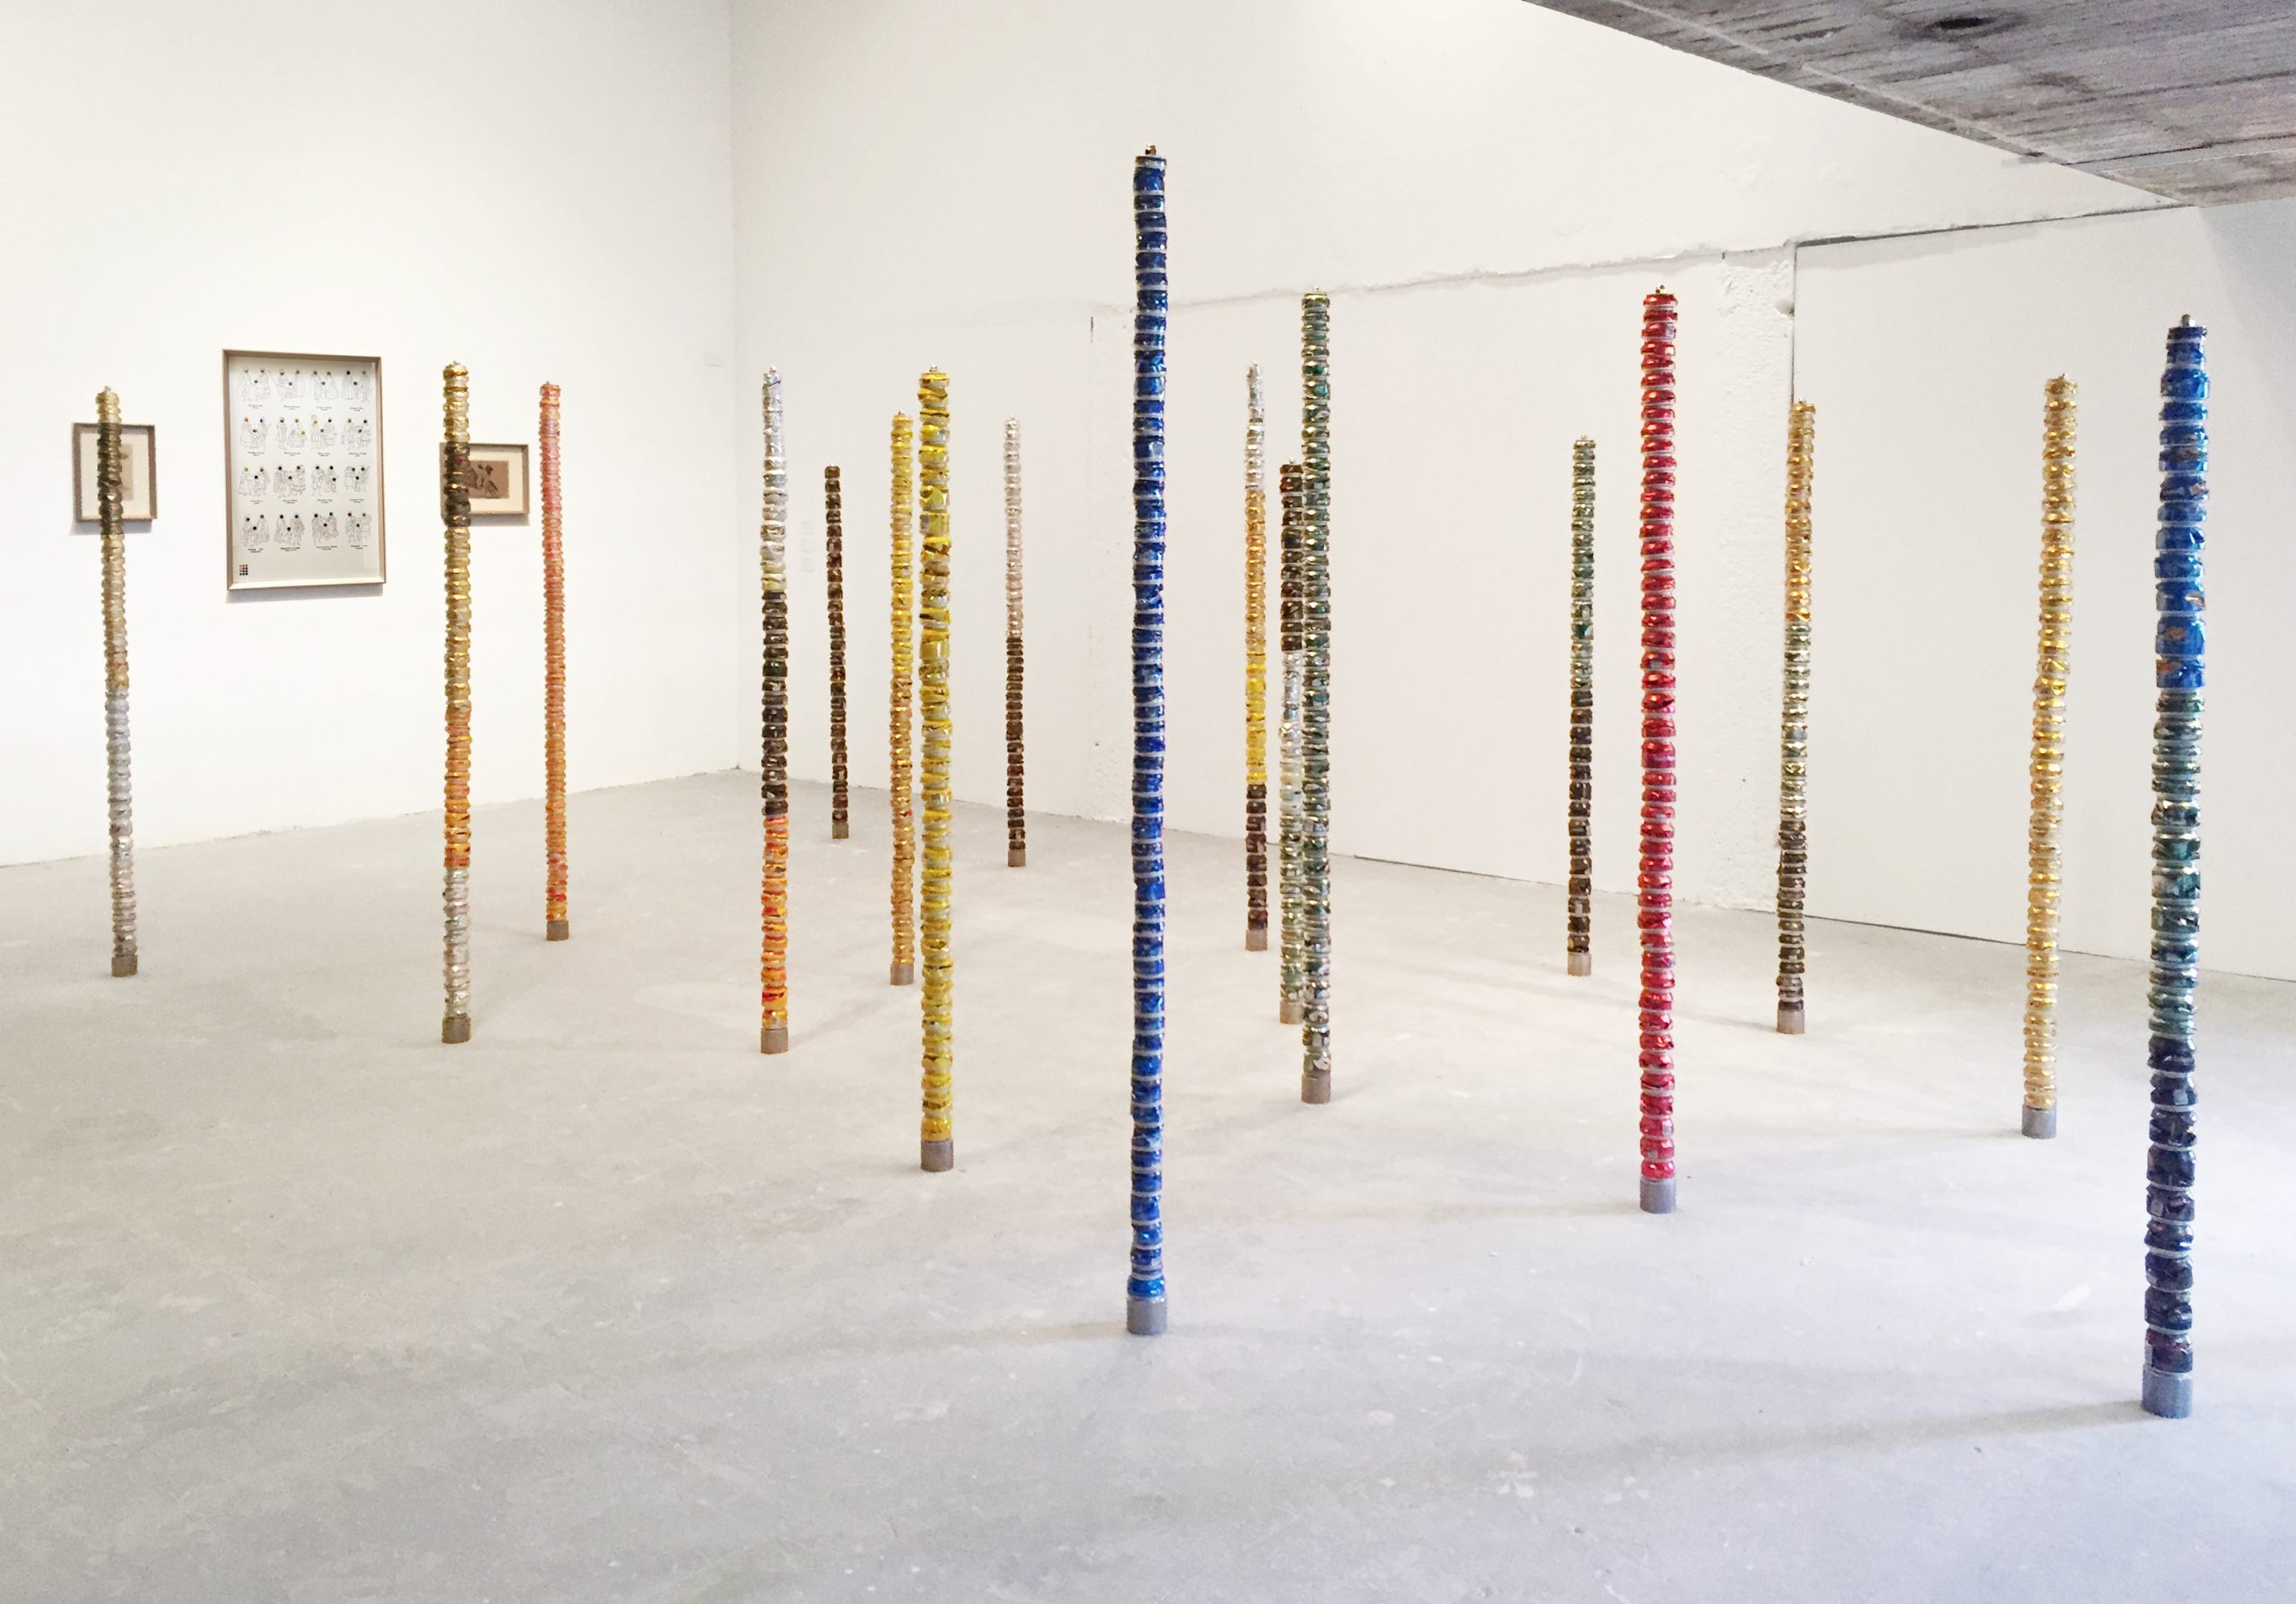 Towers built by crushed beer cans, in a gallery setting